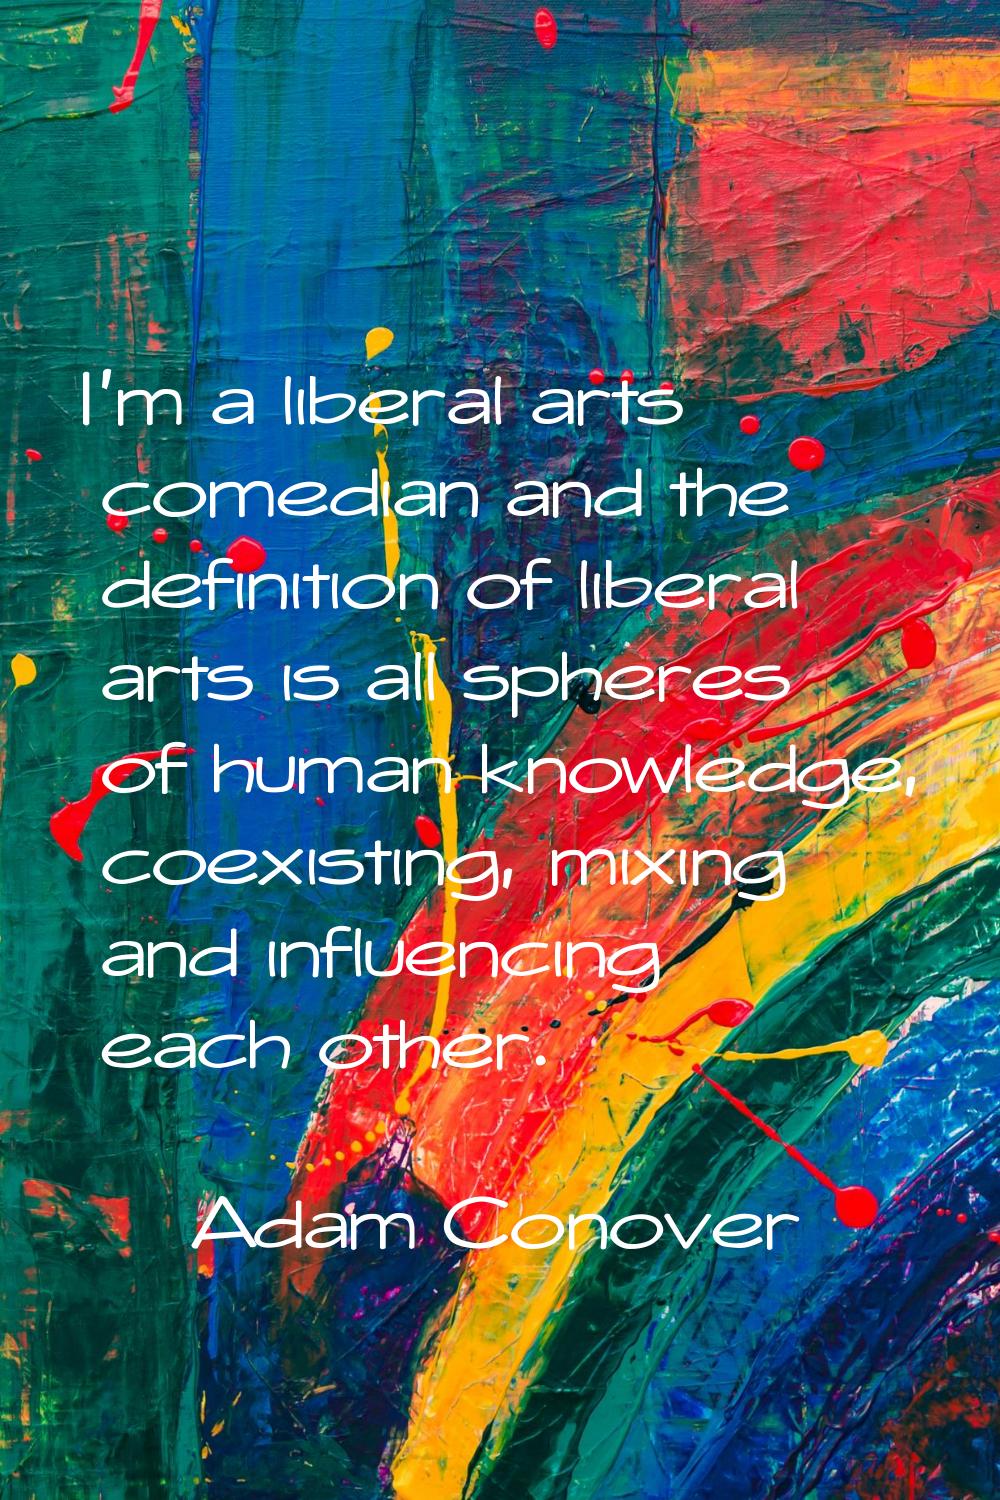 I'm a liberal arts comedian and the definition of liberal arts is all spheres of human knowledge, c